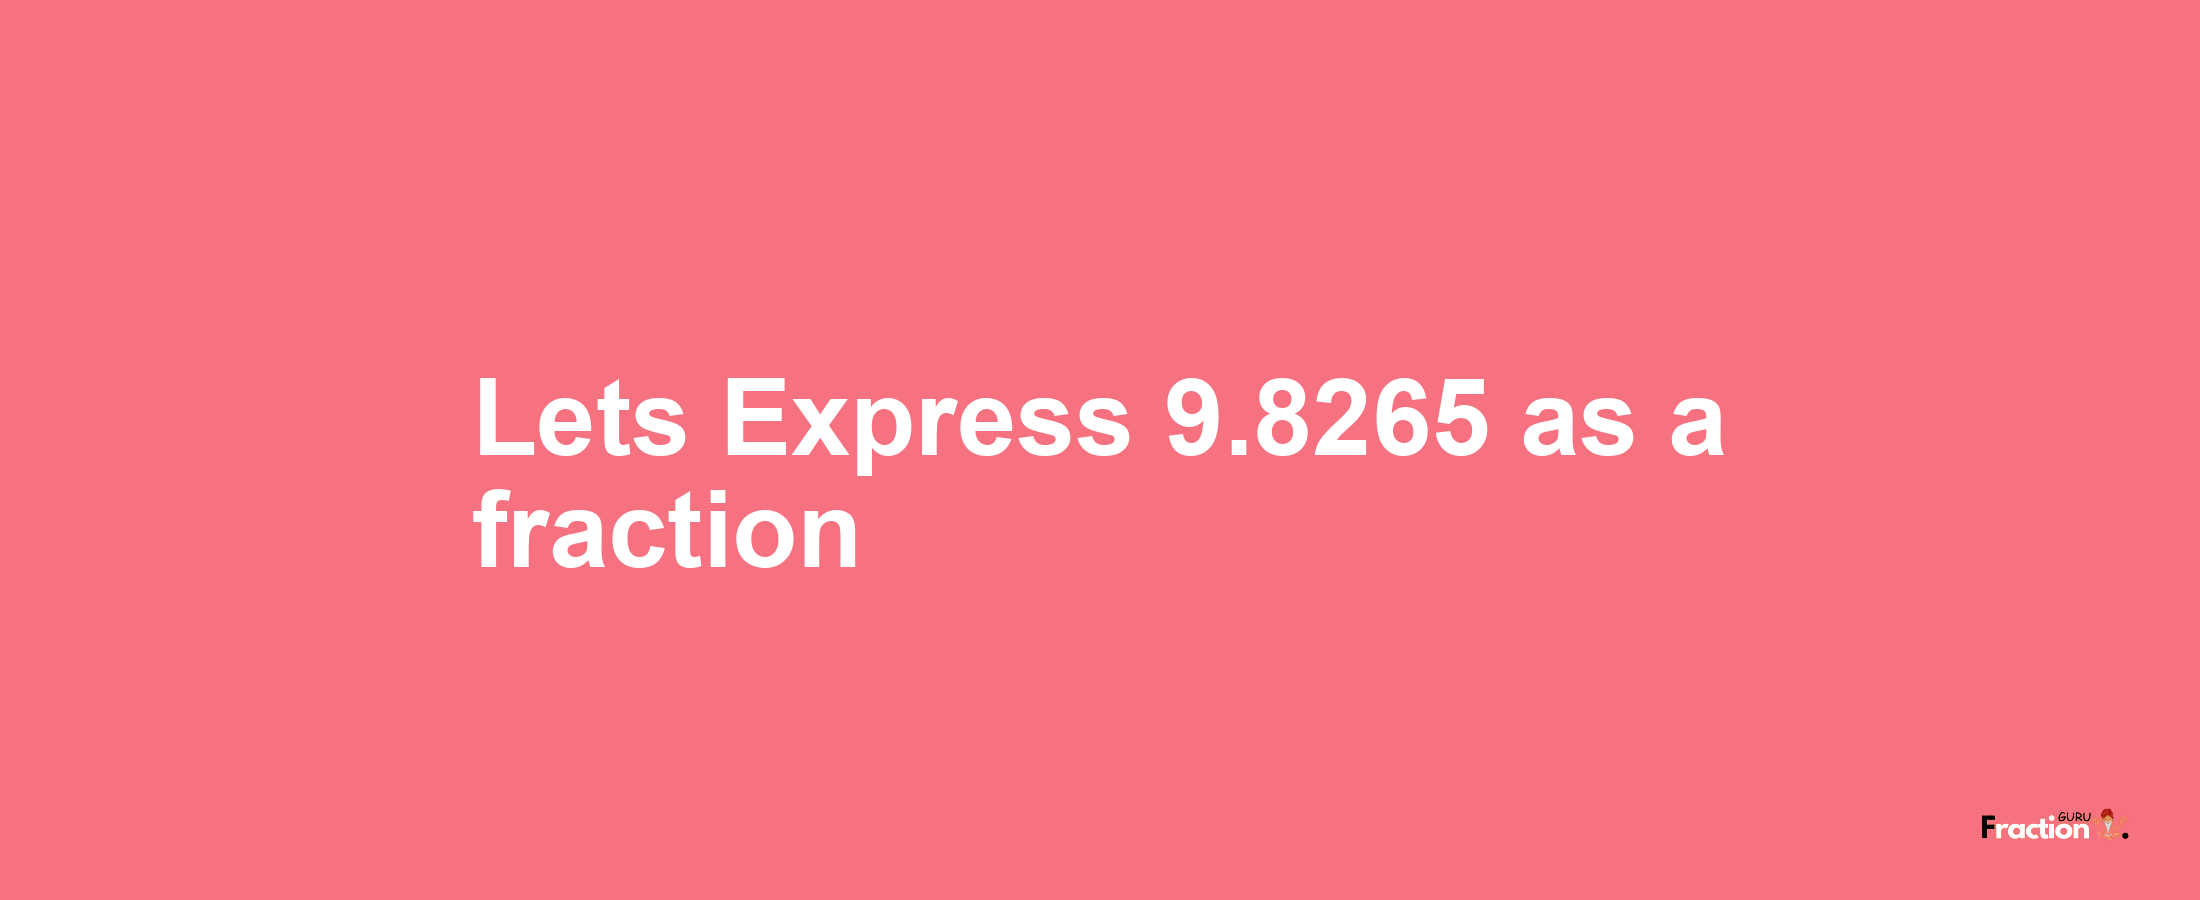 Lets Express 9.8265 as afraction